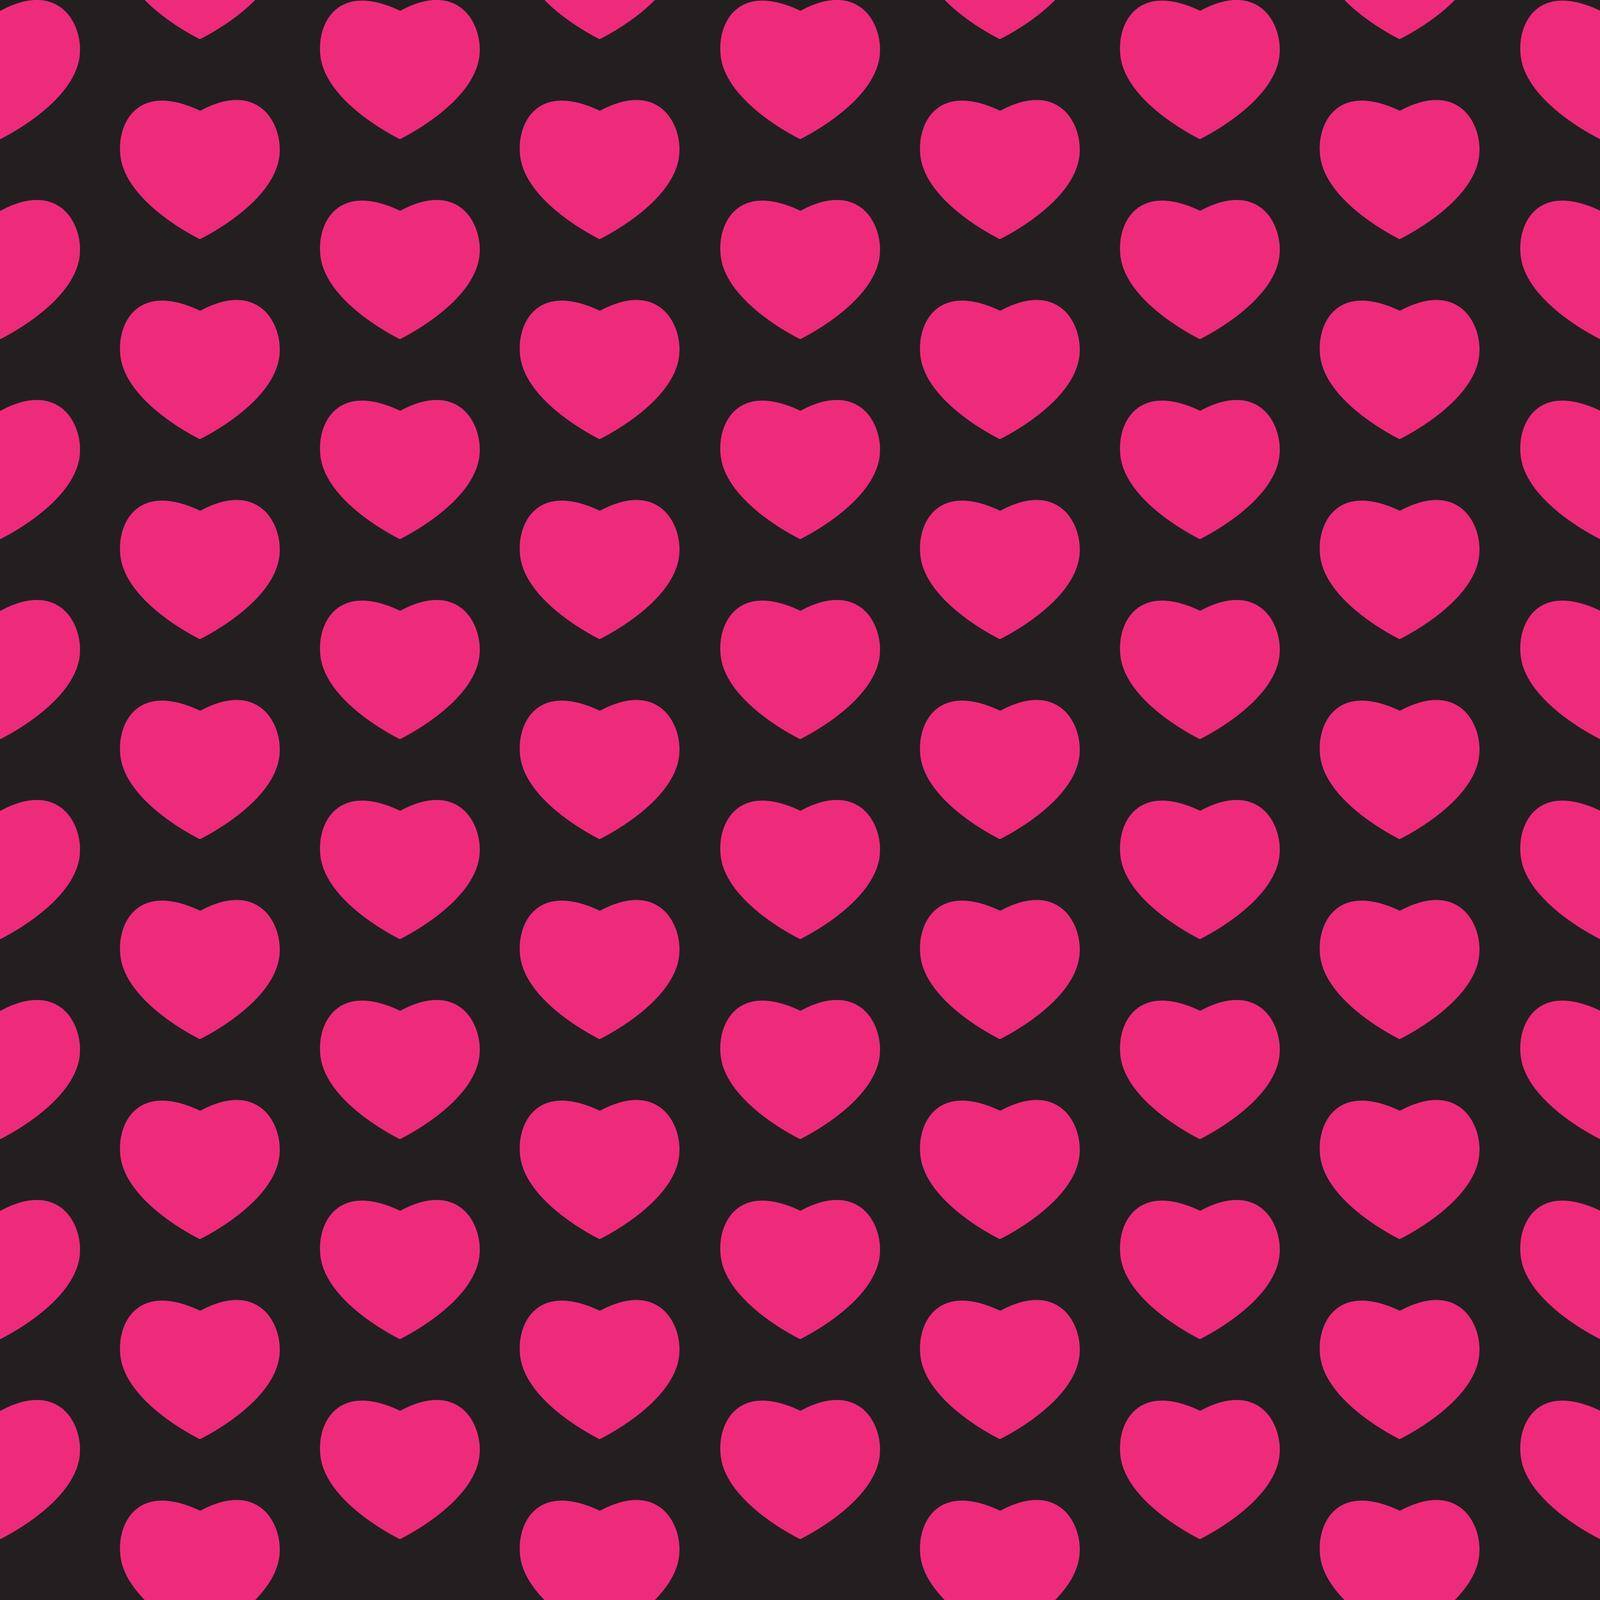 Heart Love Seamless Pattern Background Vector Illustration by yganko